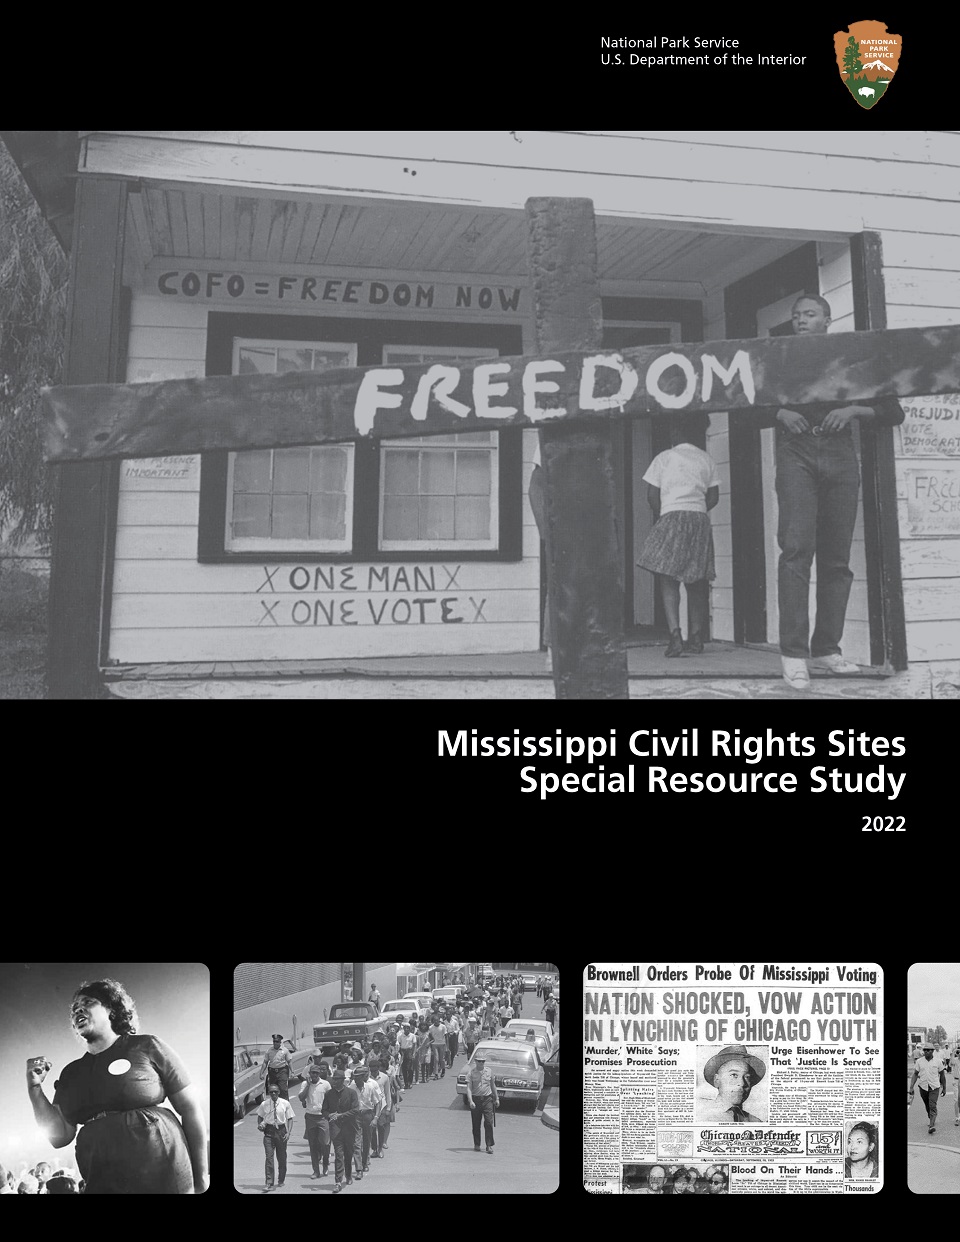 The document cover of the National Park Service Mississippi Civil Rights Sites 2022 Special Resource Study. The photo shows four photos of civil rights sites and leaders.